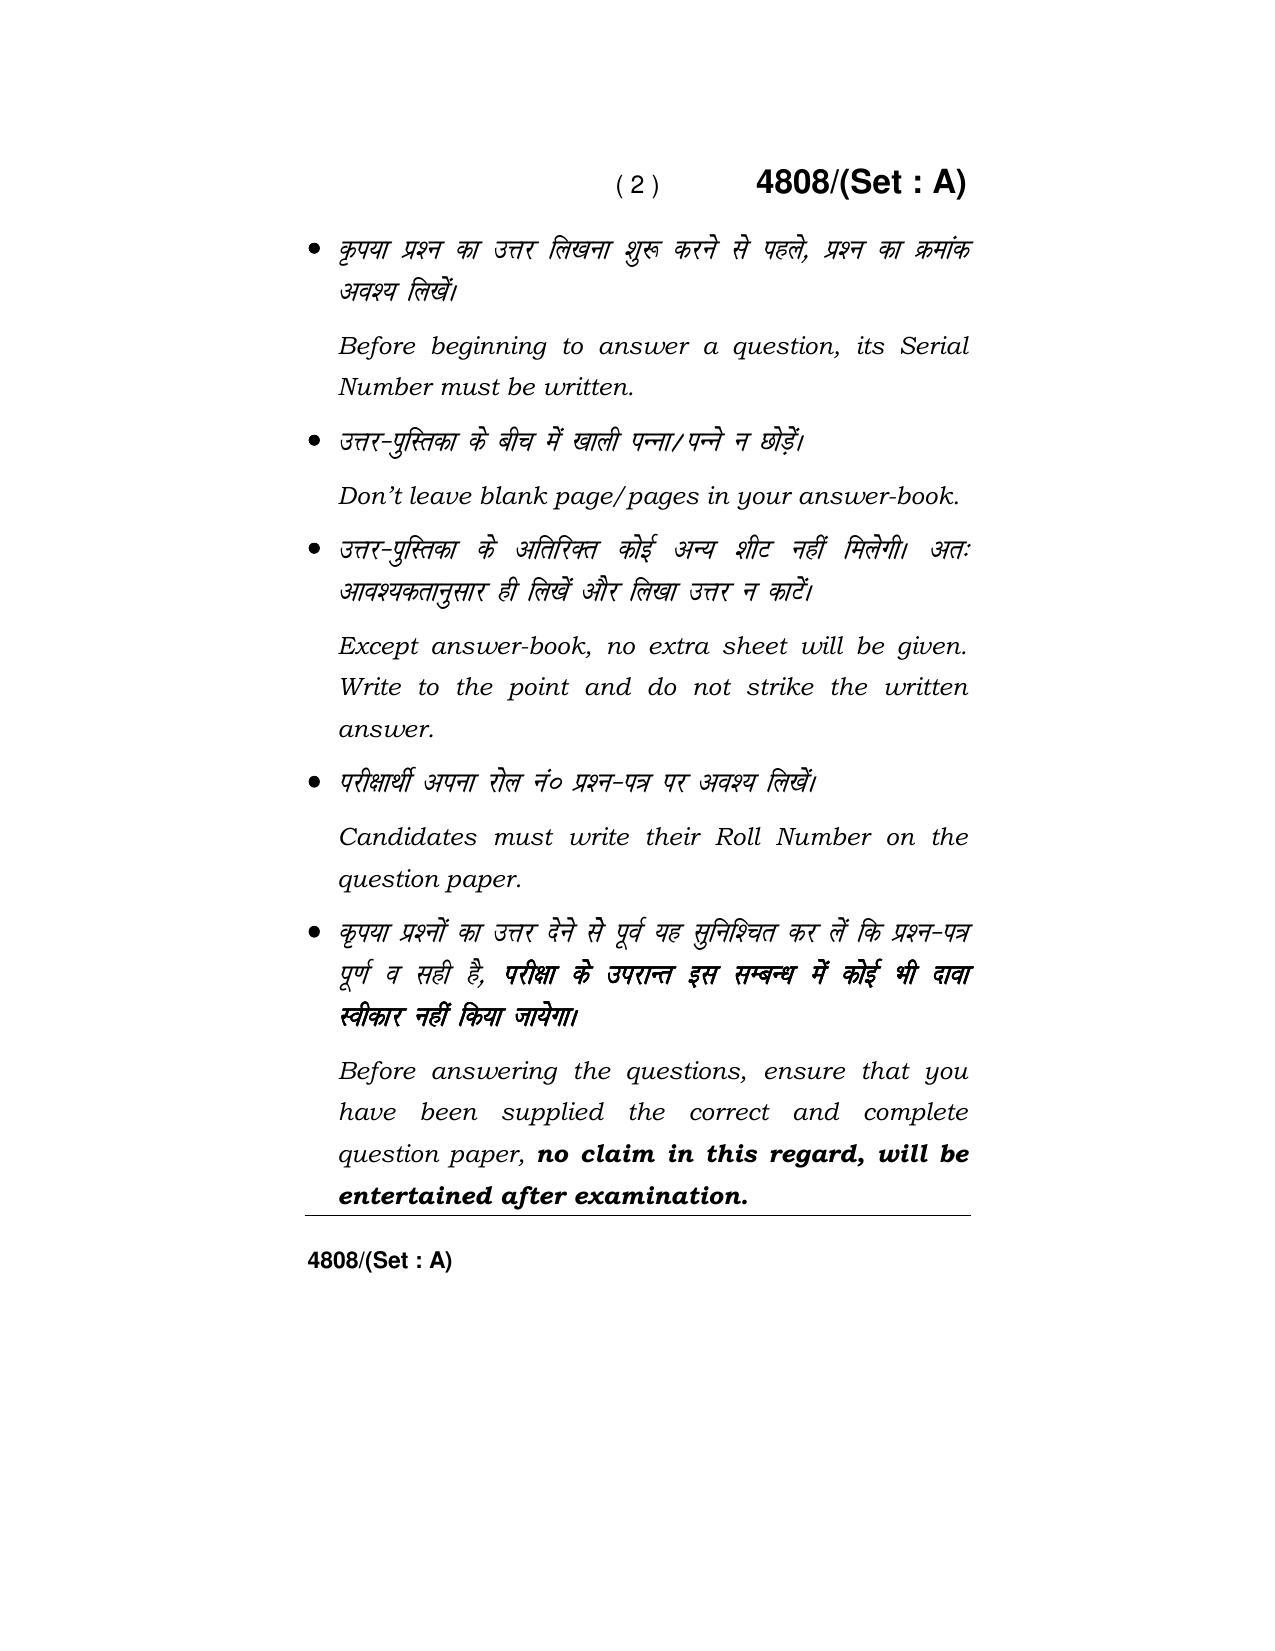 Haryana Board HBSE Class 10 Social Science (Re-appear) 2020 Question Paper - Page 2